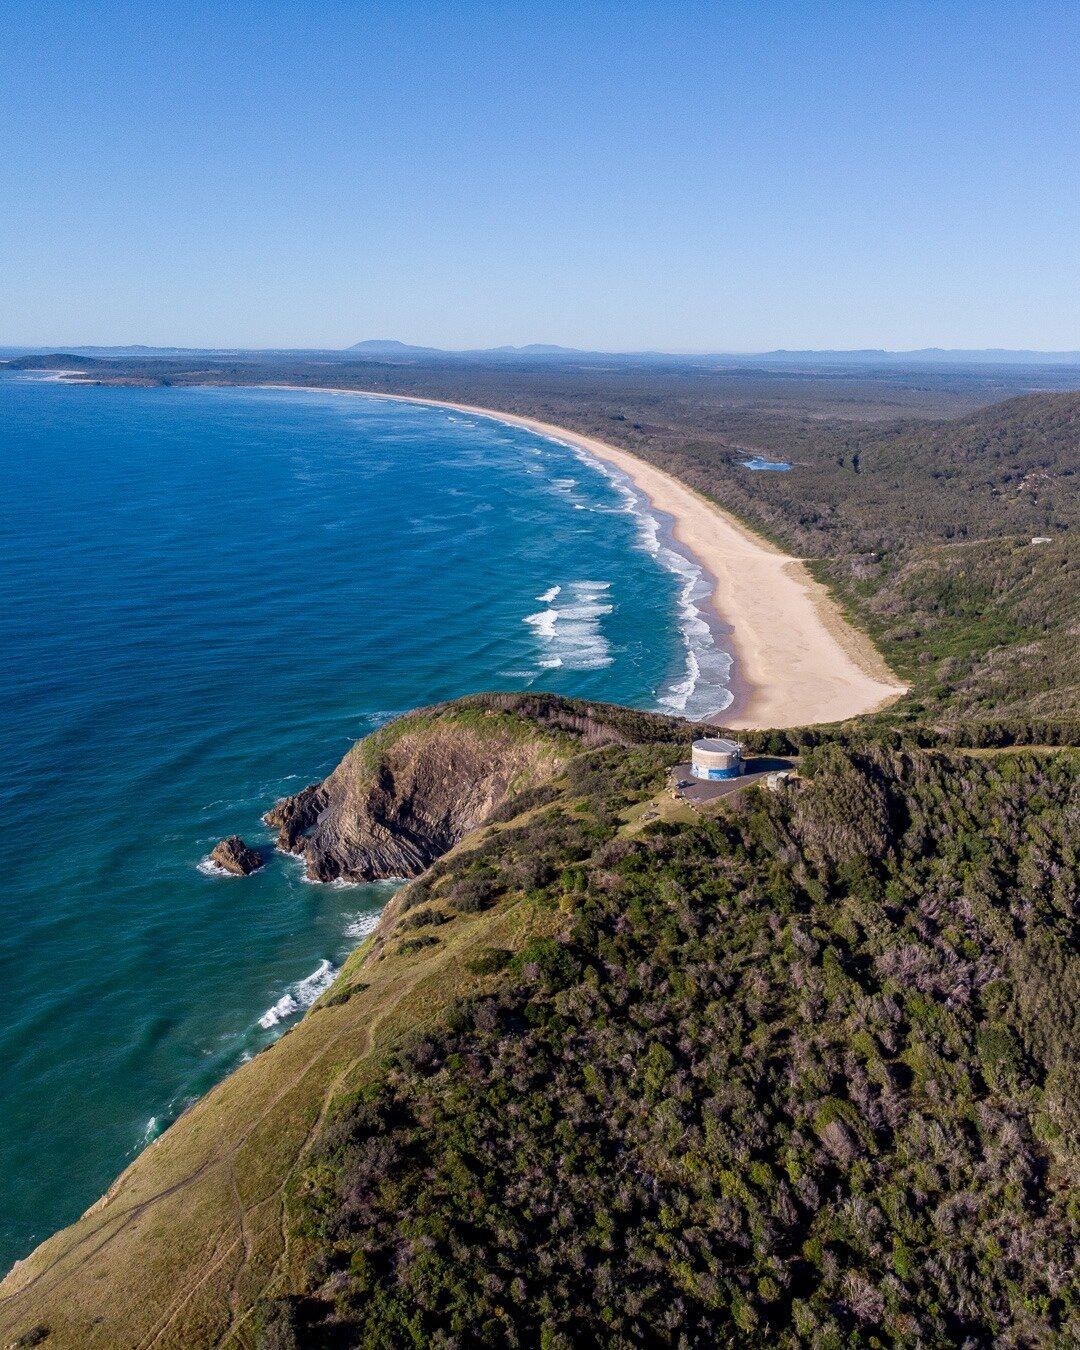 Happy new year everyone! Or have we decided that wishing a happy new year is like wishing good luck before you go on stage? Who volunteers to brainstorm the 2021 equivalent of break a leg? 🎆
📍 Crescent Head, NSW - #dunghutticountry